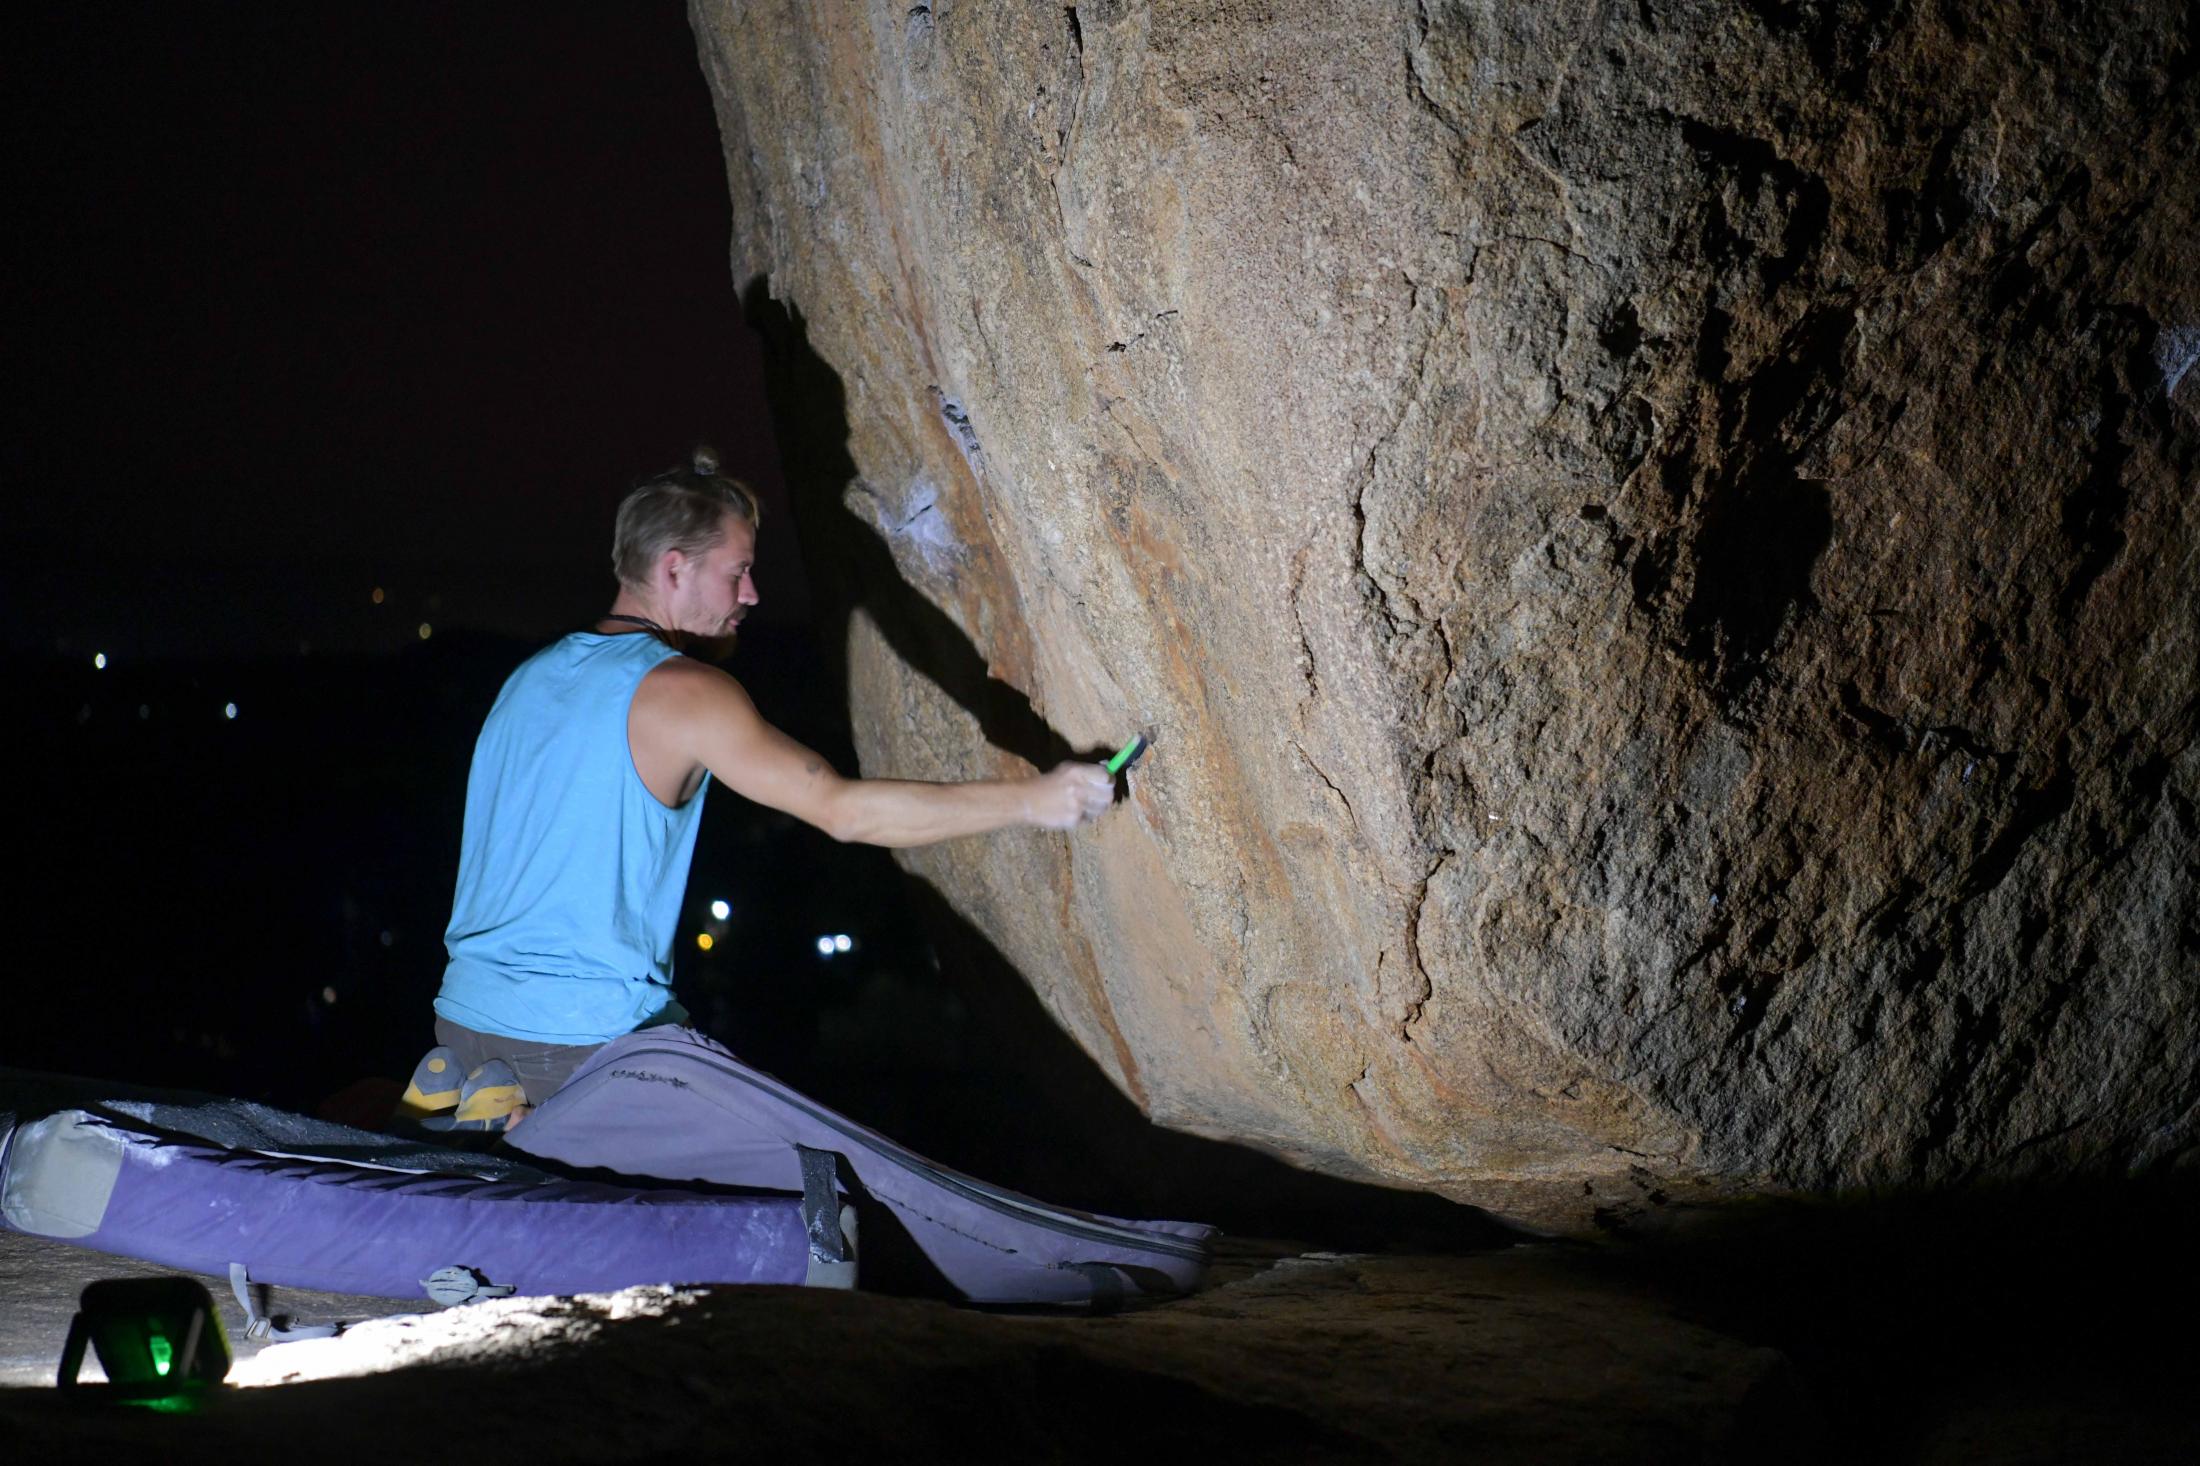 Using a night lamp Mathias brushes the rocks with chalk before the climb